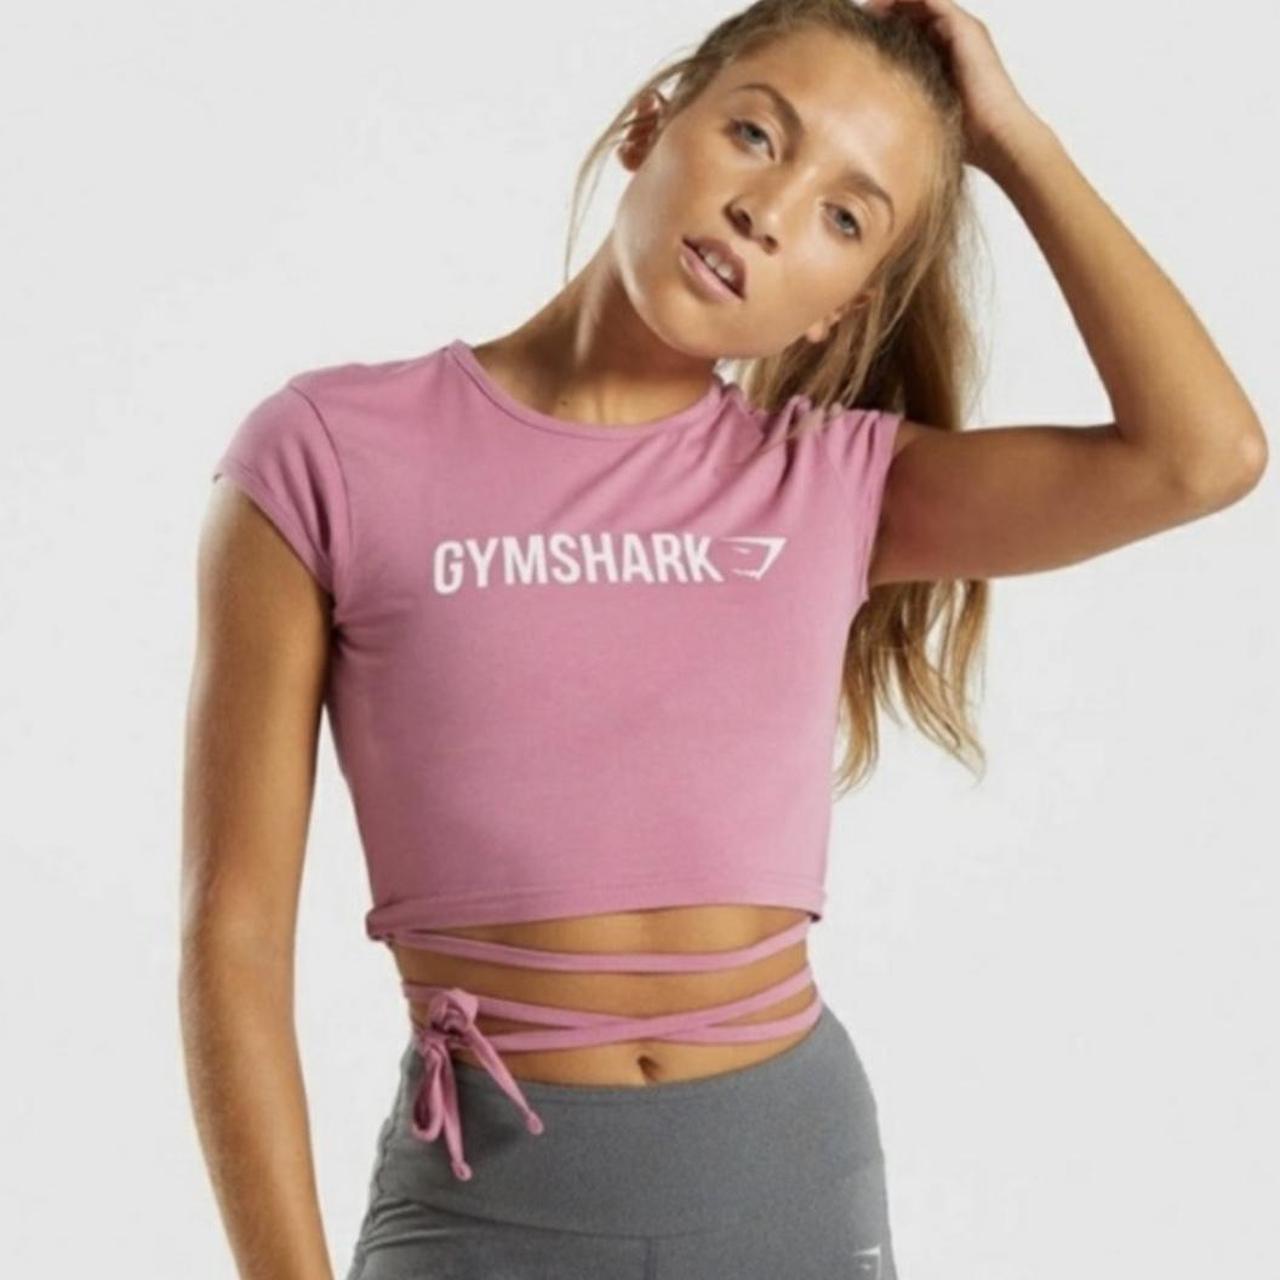 Gymshark - We're rockin' the pink today 'cause that is SO fetch💗 If you  know, you know😉🤷🏽‍♀️ #Gymshark